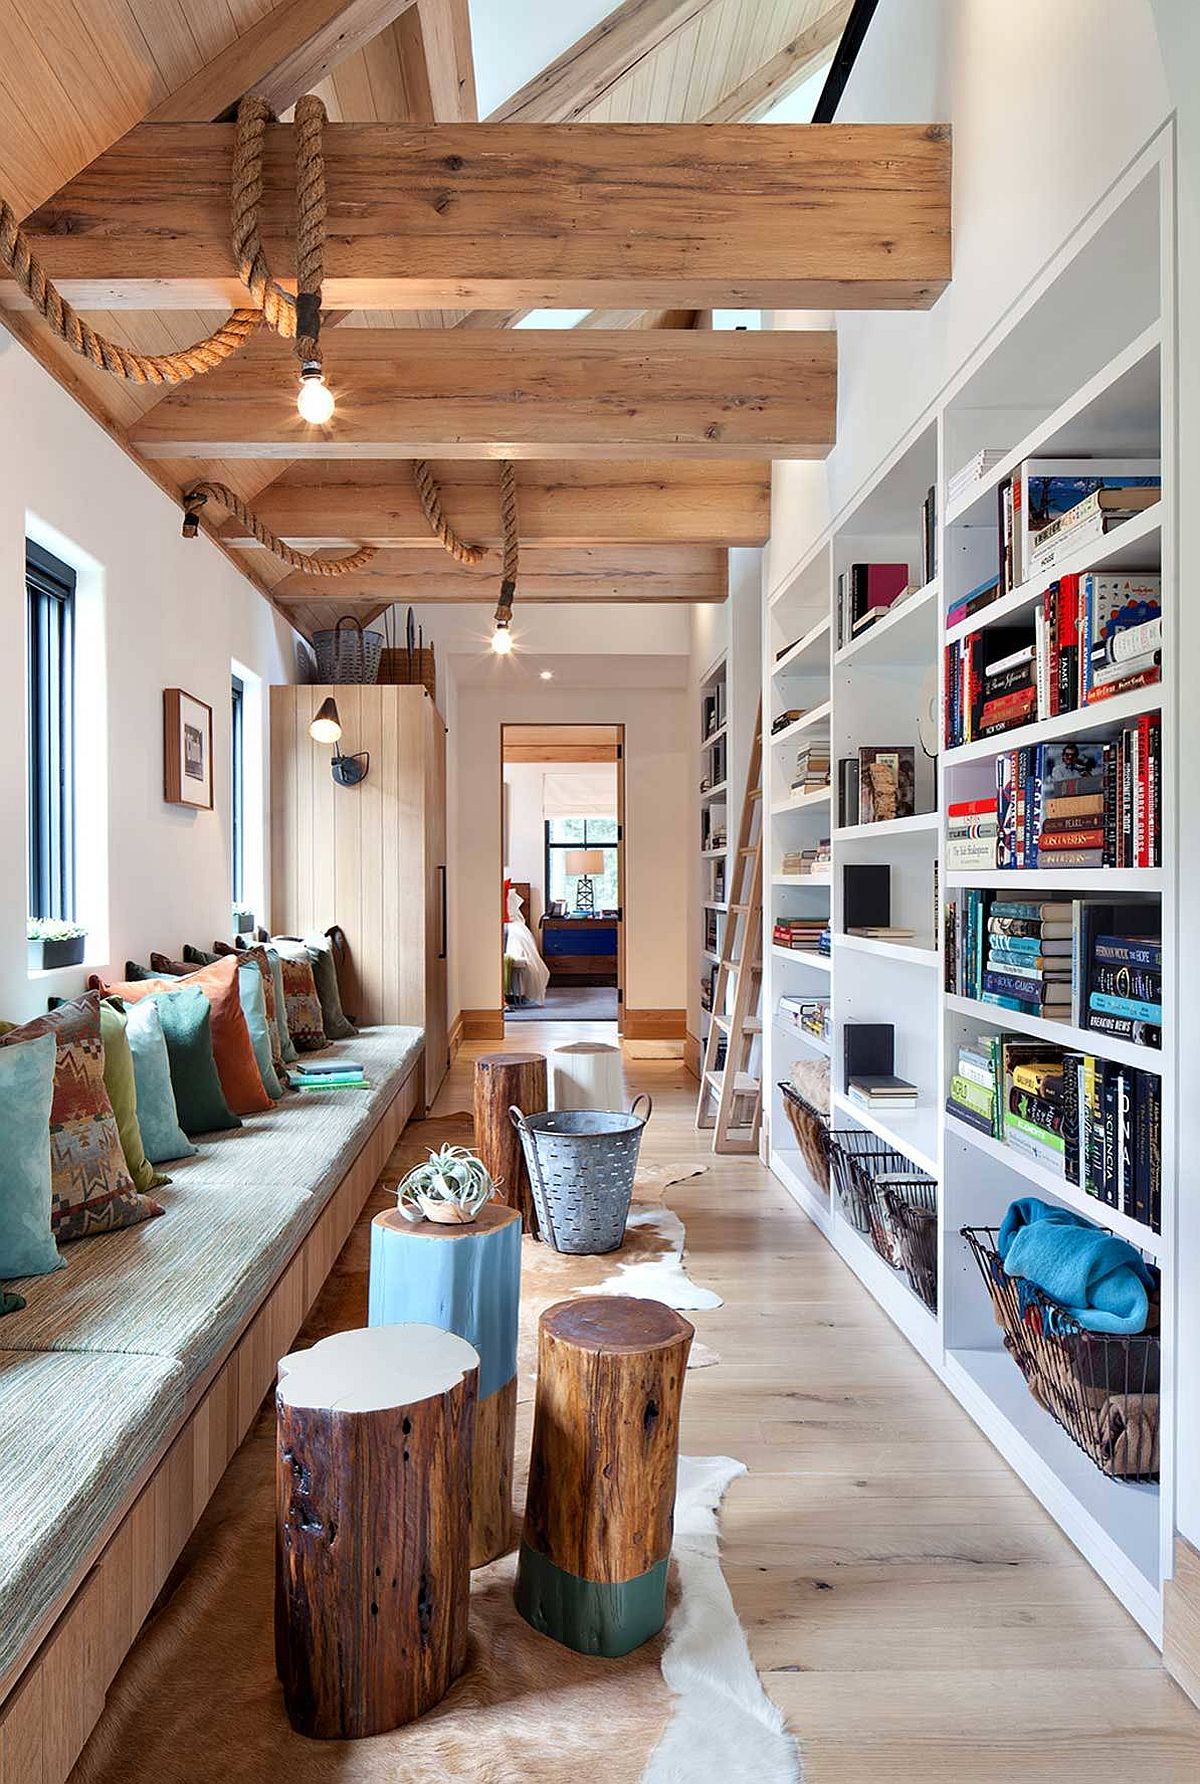 Rustic-hallway-acts-as-the-perfect-space-to-rest-relax-and-catch-up-with-your-favorite-book-84682